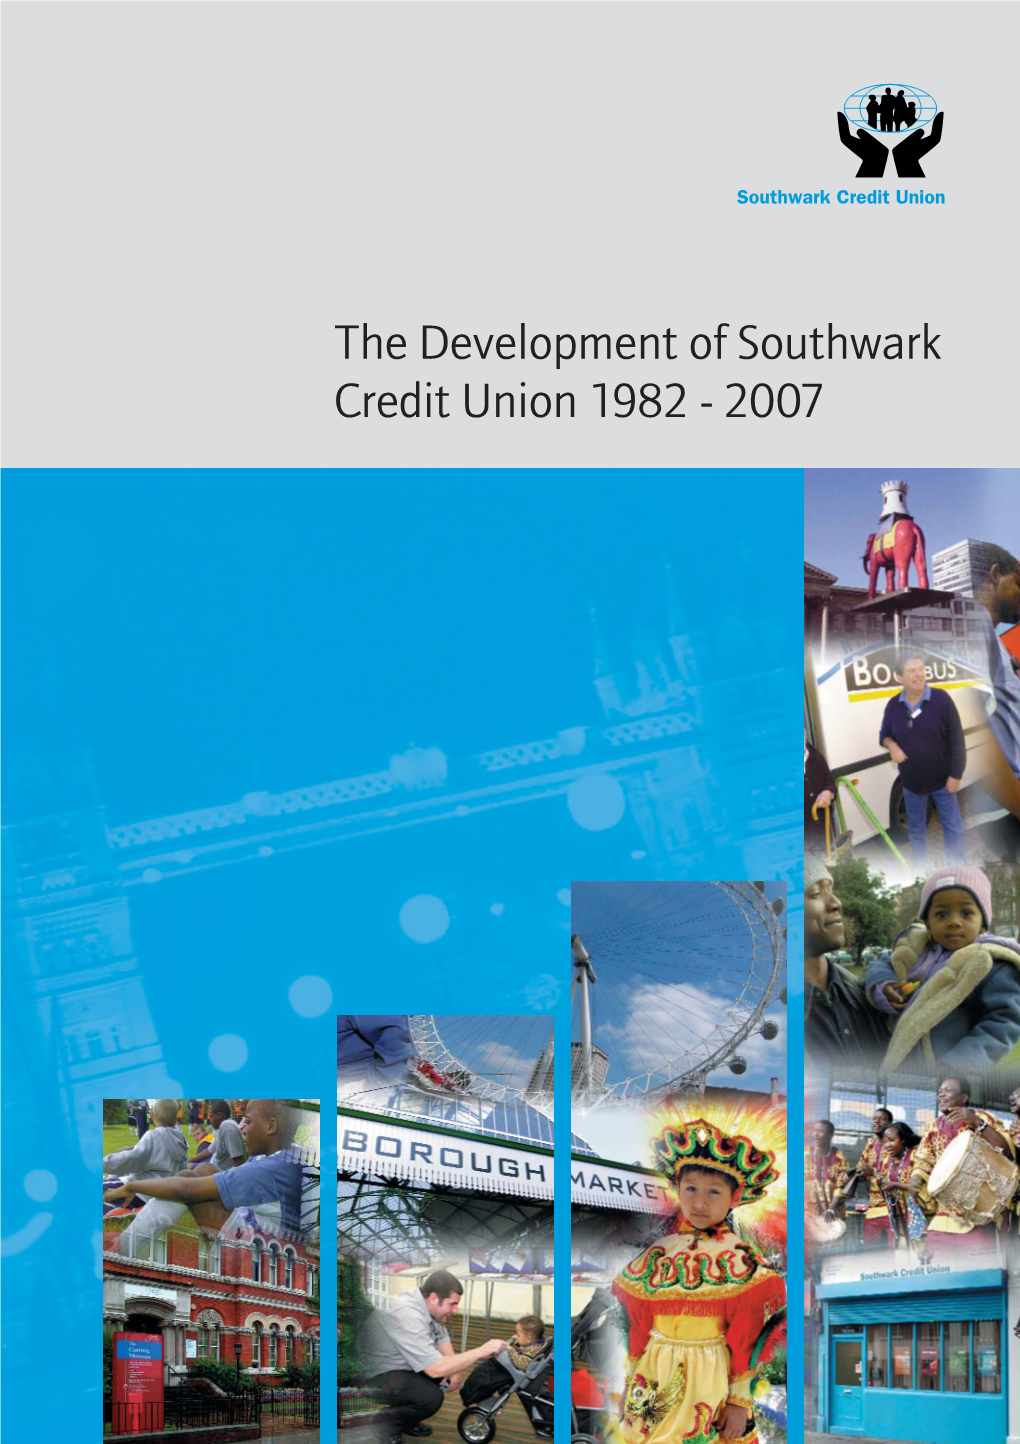 The Development of Southwark Credit Union 1982 - 2007 Scu Cover A4 8/11/07 10:43 Am Page 2